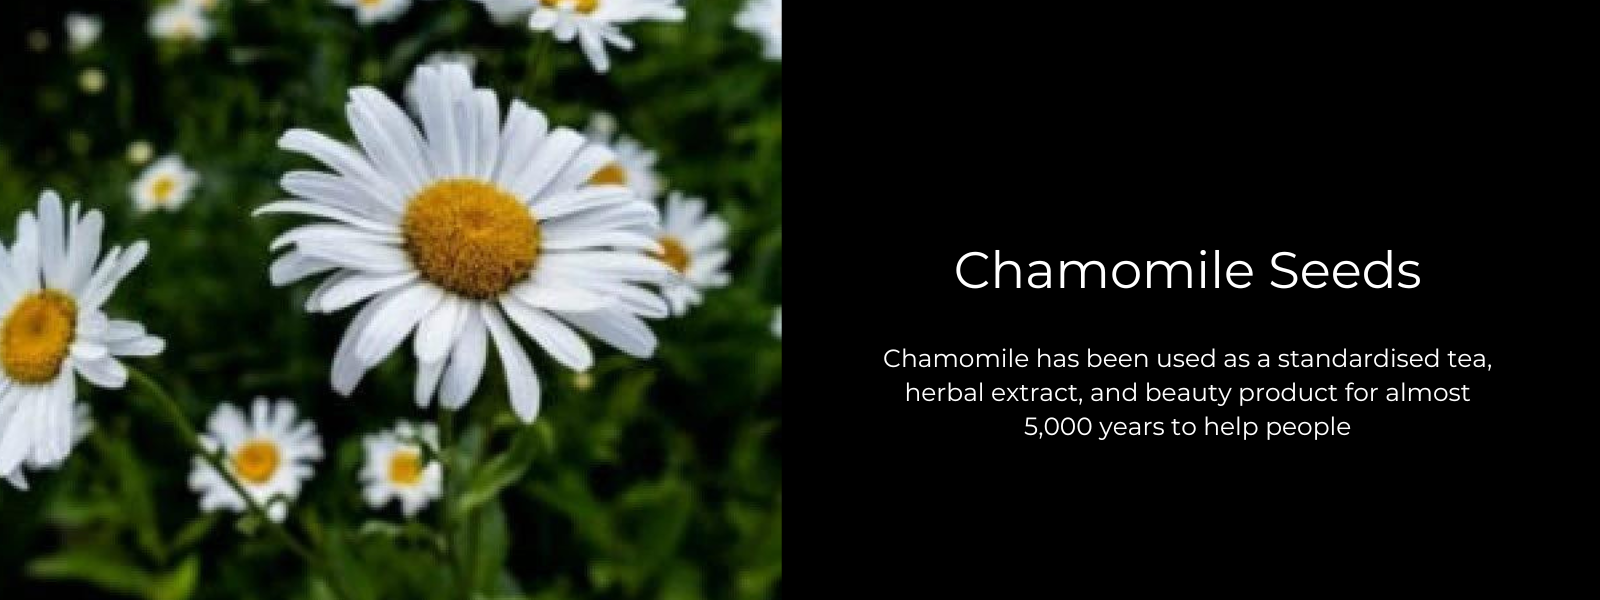 Chamomile Seeds - Health Benefits, Uses and Important Facts